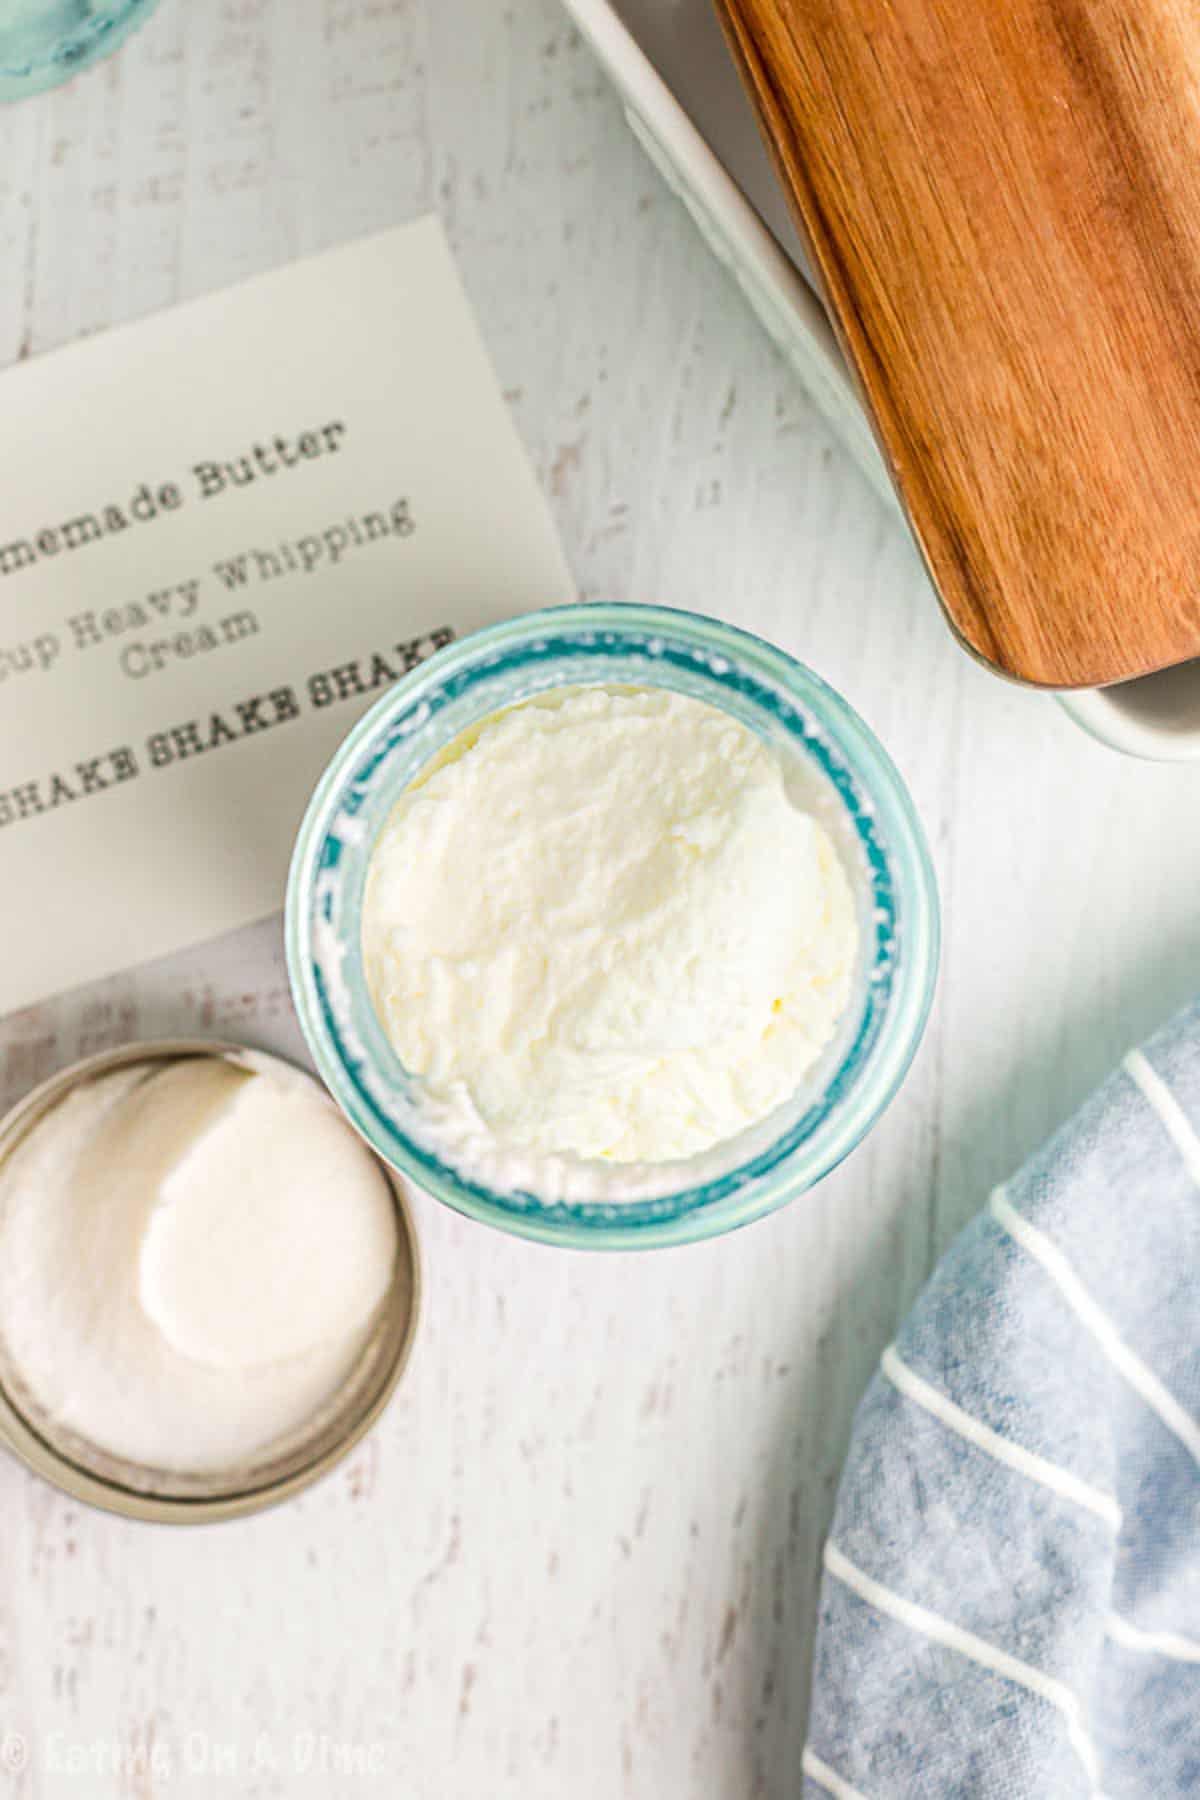 The cream whipped to form butter.  